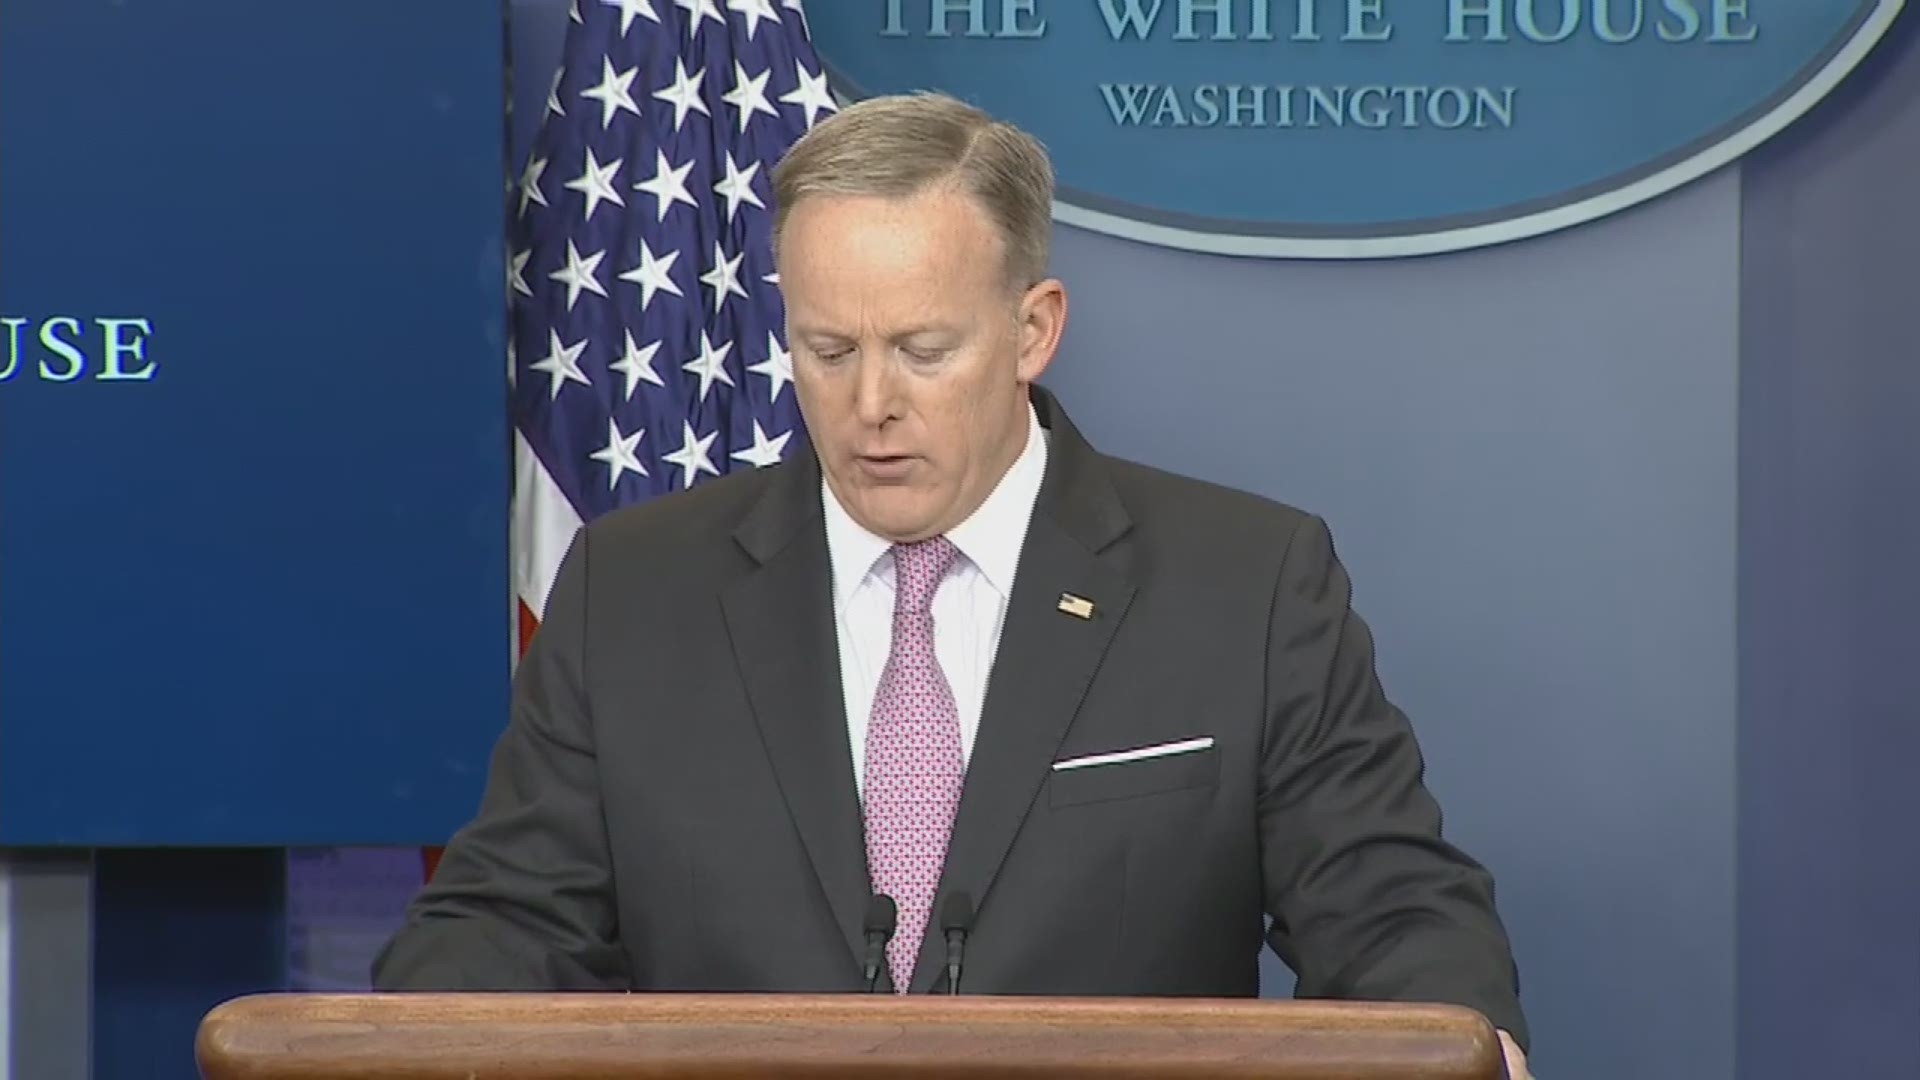 United States Press Secretary Sean Spicer confirms Thursday that the military dropped its largest non-nuclear bomb on a system of ISIS tunnels in Afghanistan.